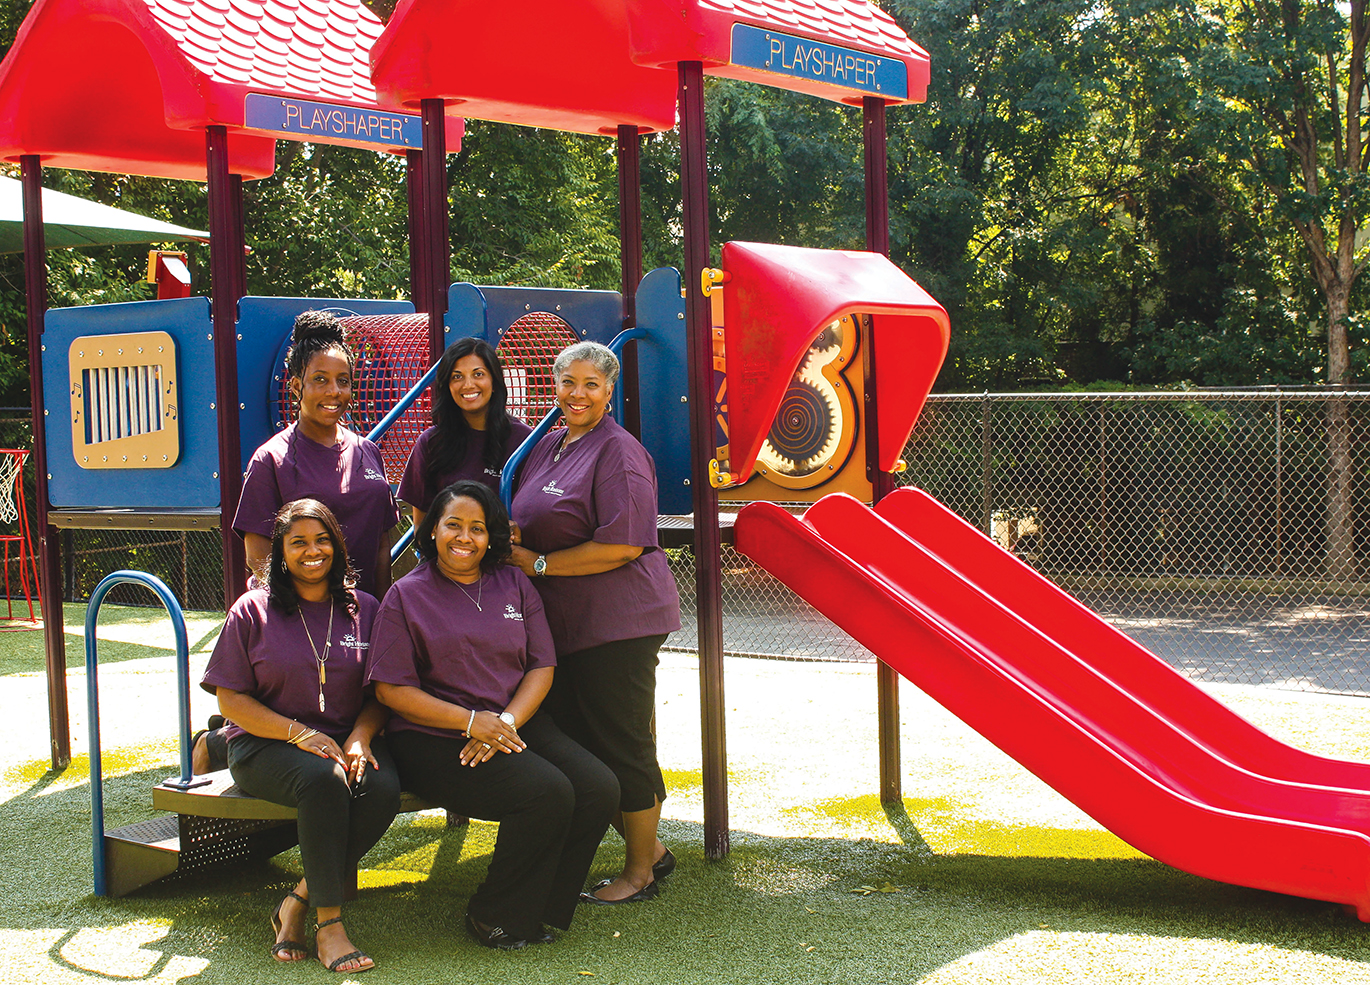 Lawrence (front left) and Watson-Grier (front right), along with the rest of their team, serve children and families of the Tech community through two on-campus child care facilities.